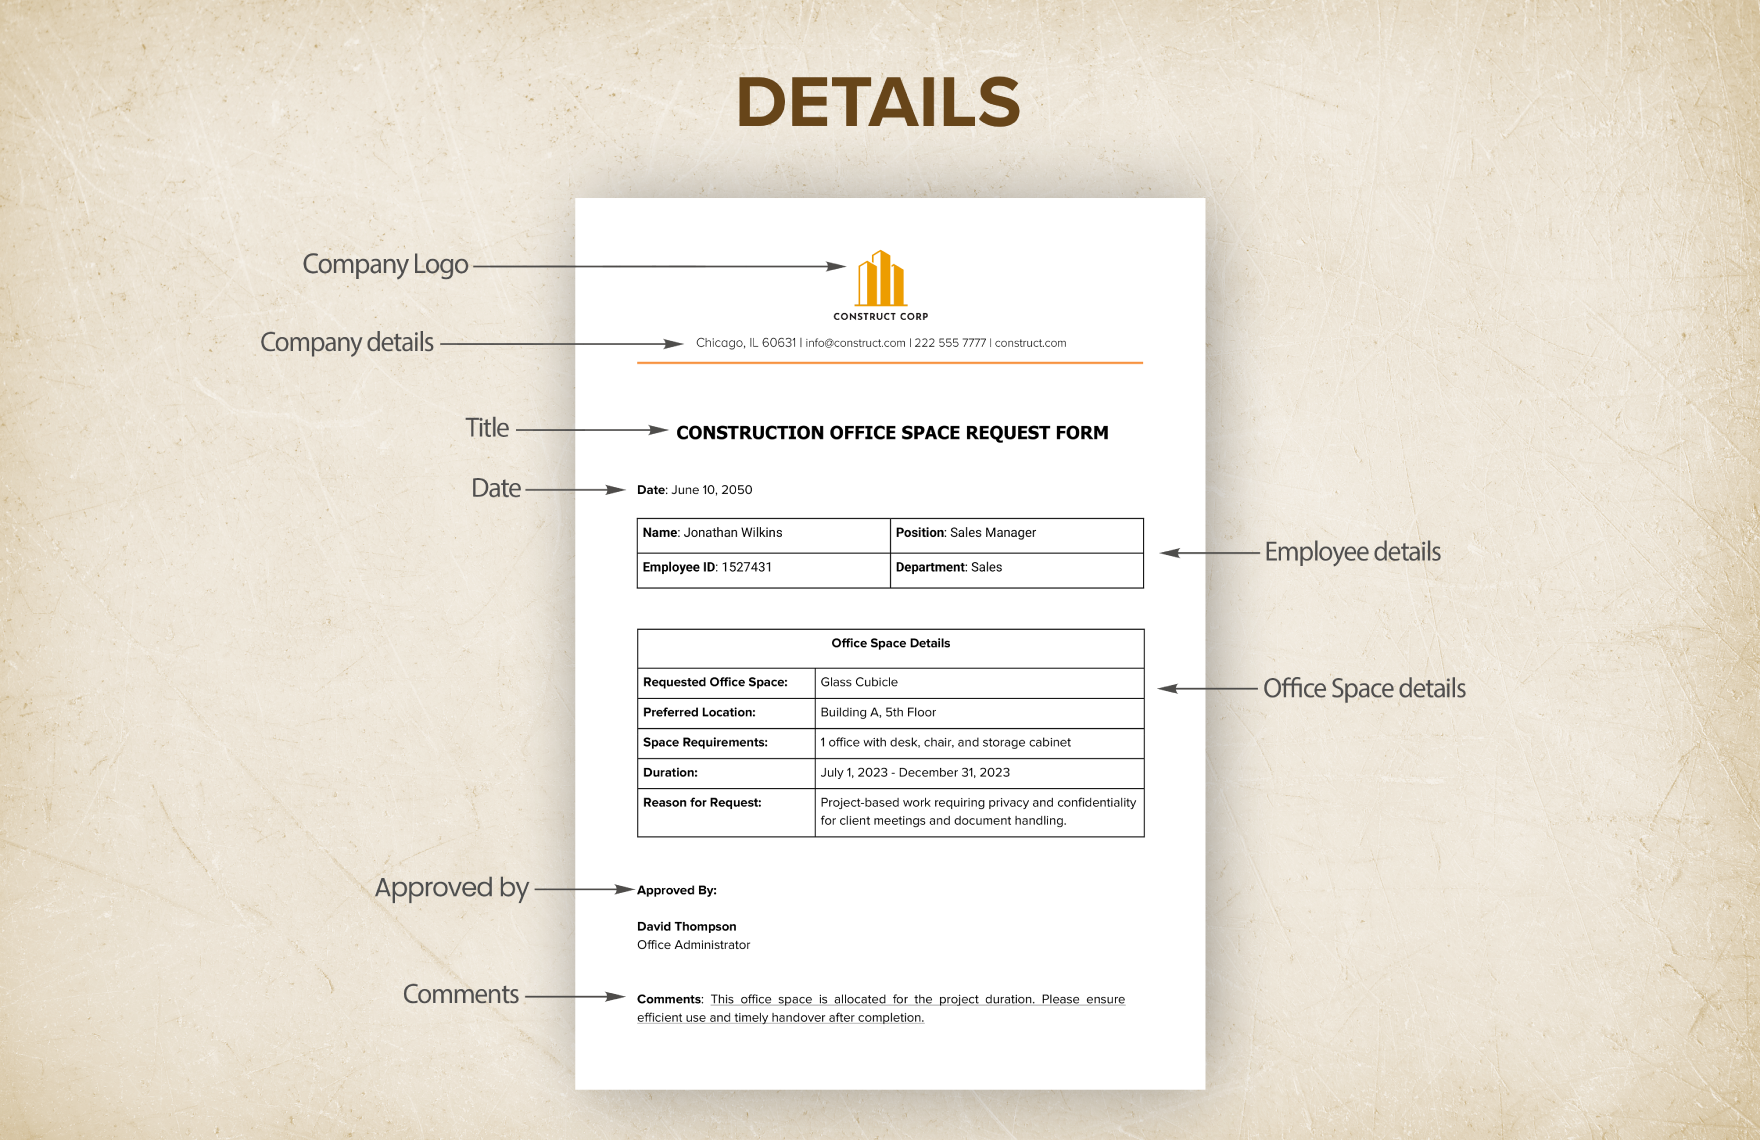 Construction Office Space Request Form Template